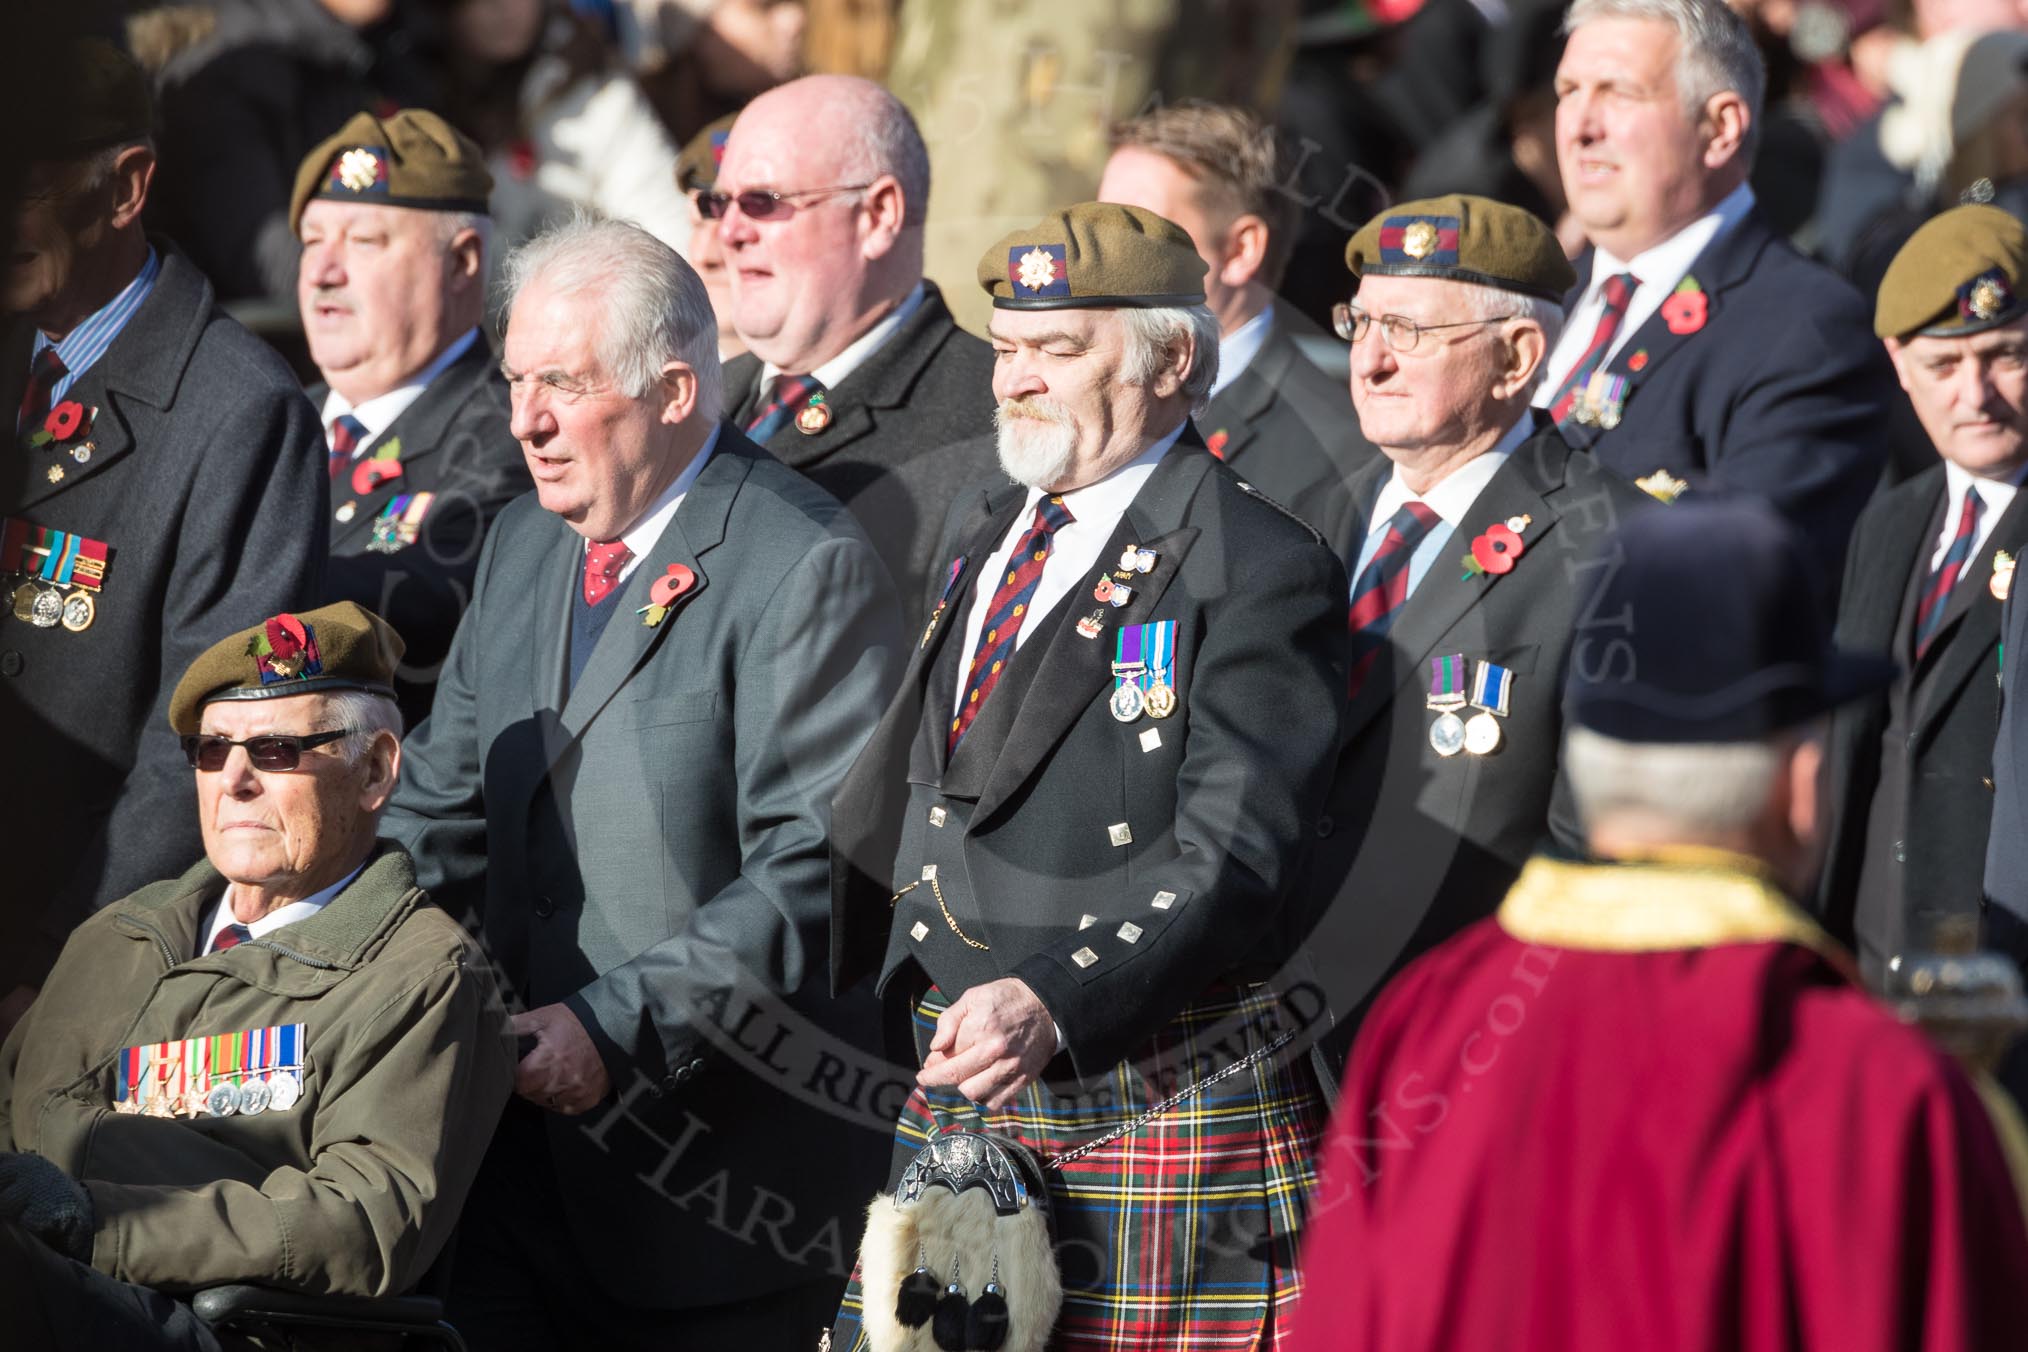 March Past, Remembrance Sunday at the Cenotaph 2016.
Cenotaph, Whitehall, London SW1,
London,
Greater London,
United Kingdom,
on 13 November 2016 at 12:39, image #81